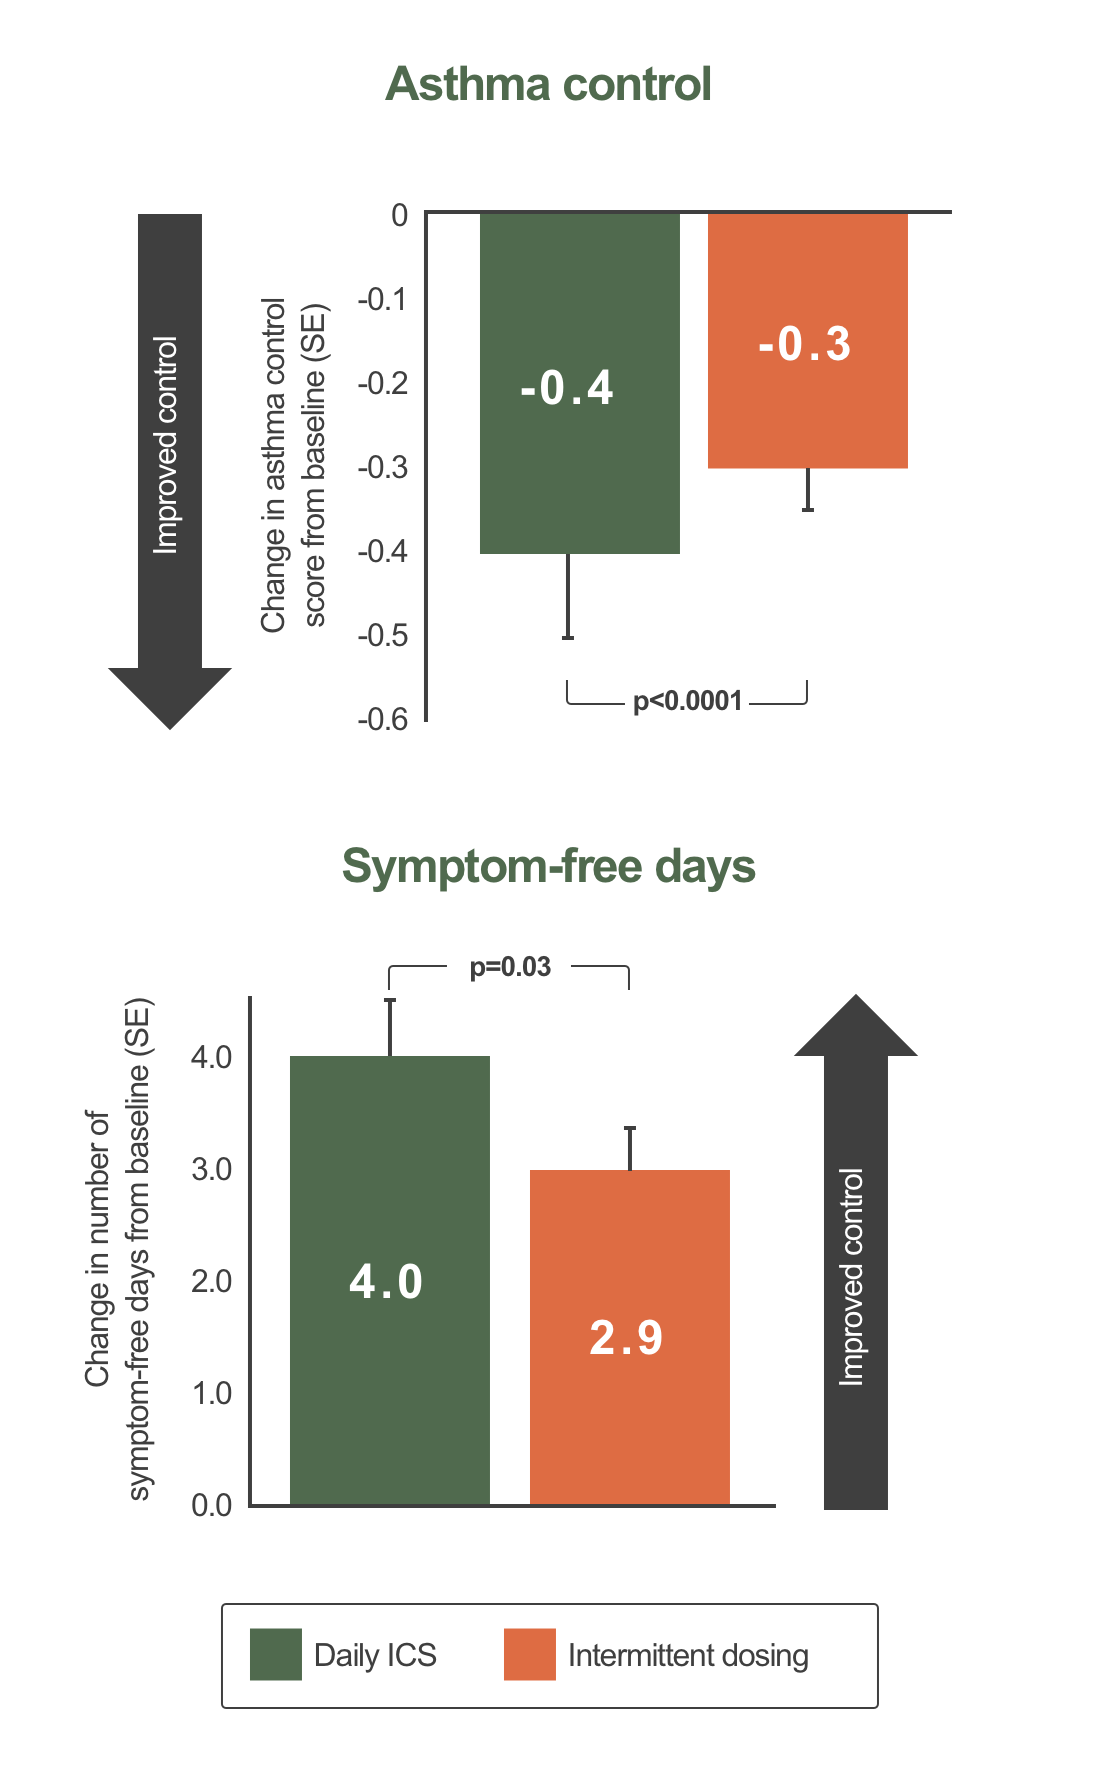 increased asthma control and symptom free days in patients with mild asthma treated with regular versus intermittent ICS